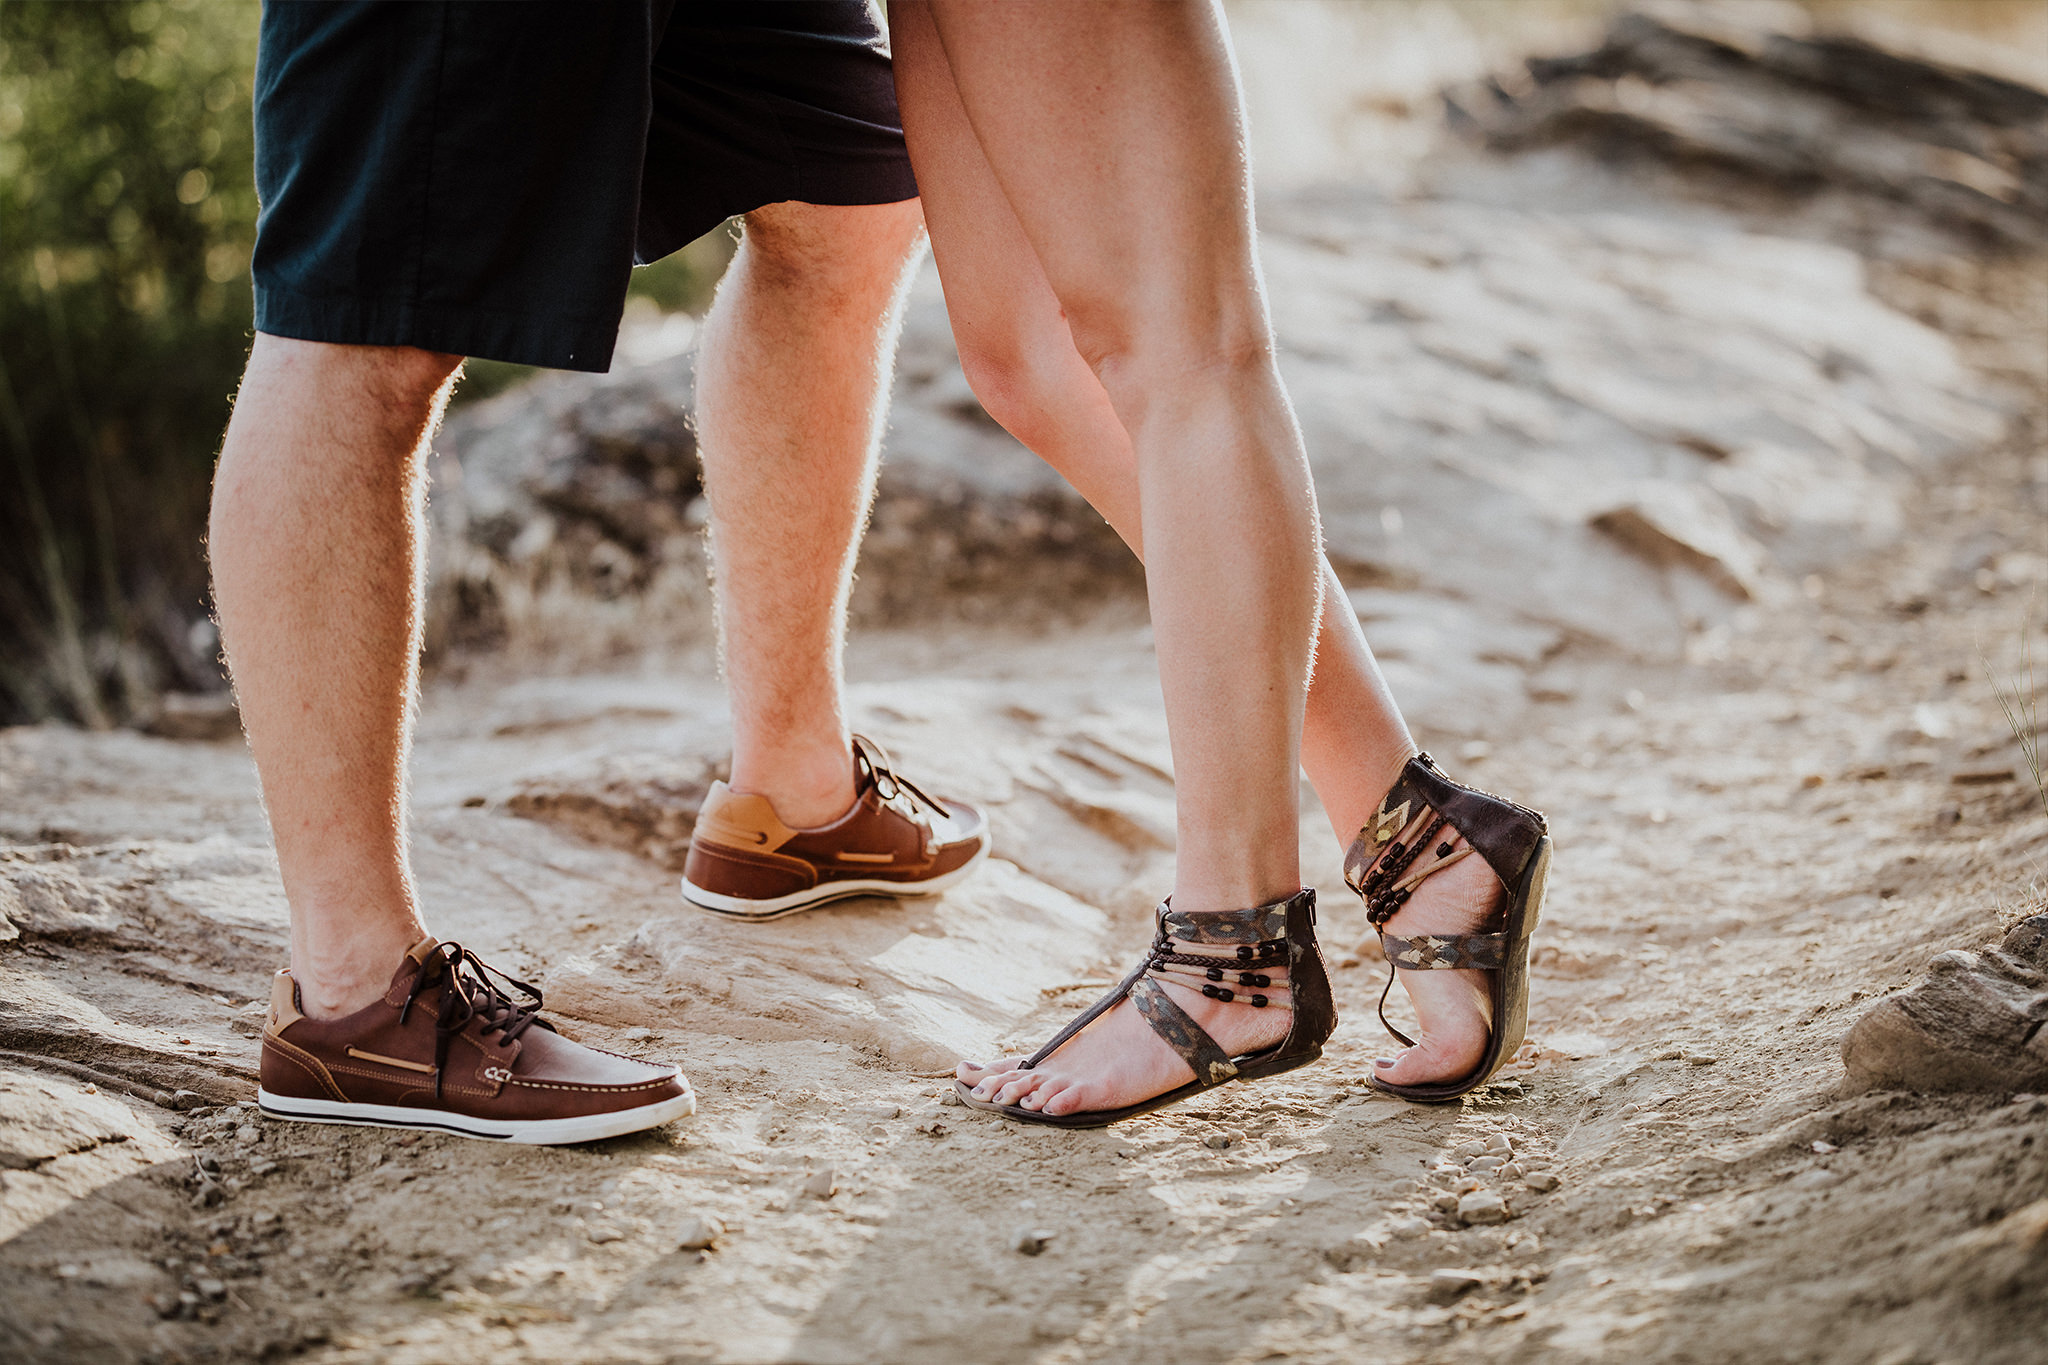 Man and woman's legs, feet in sandals on dirt path